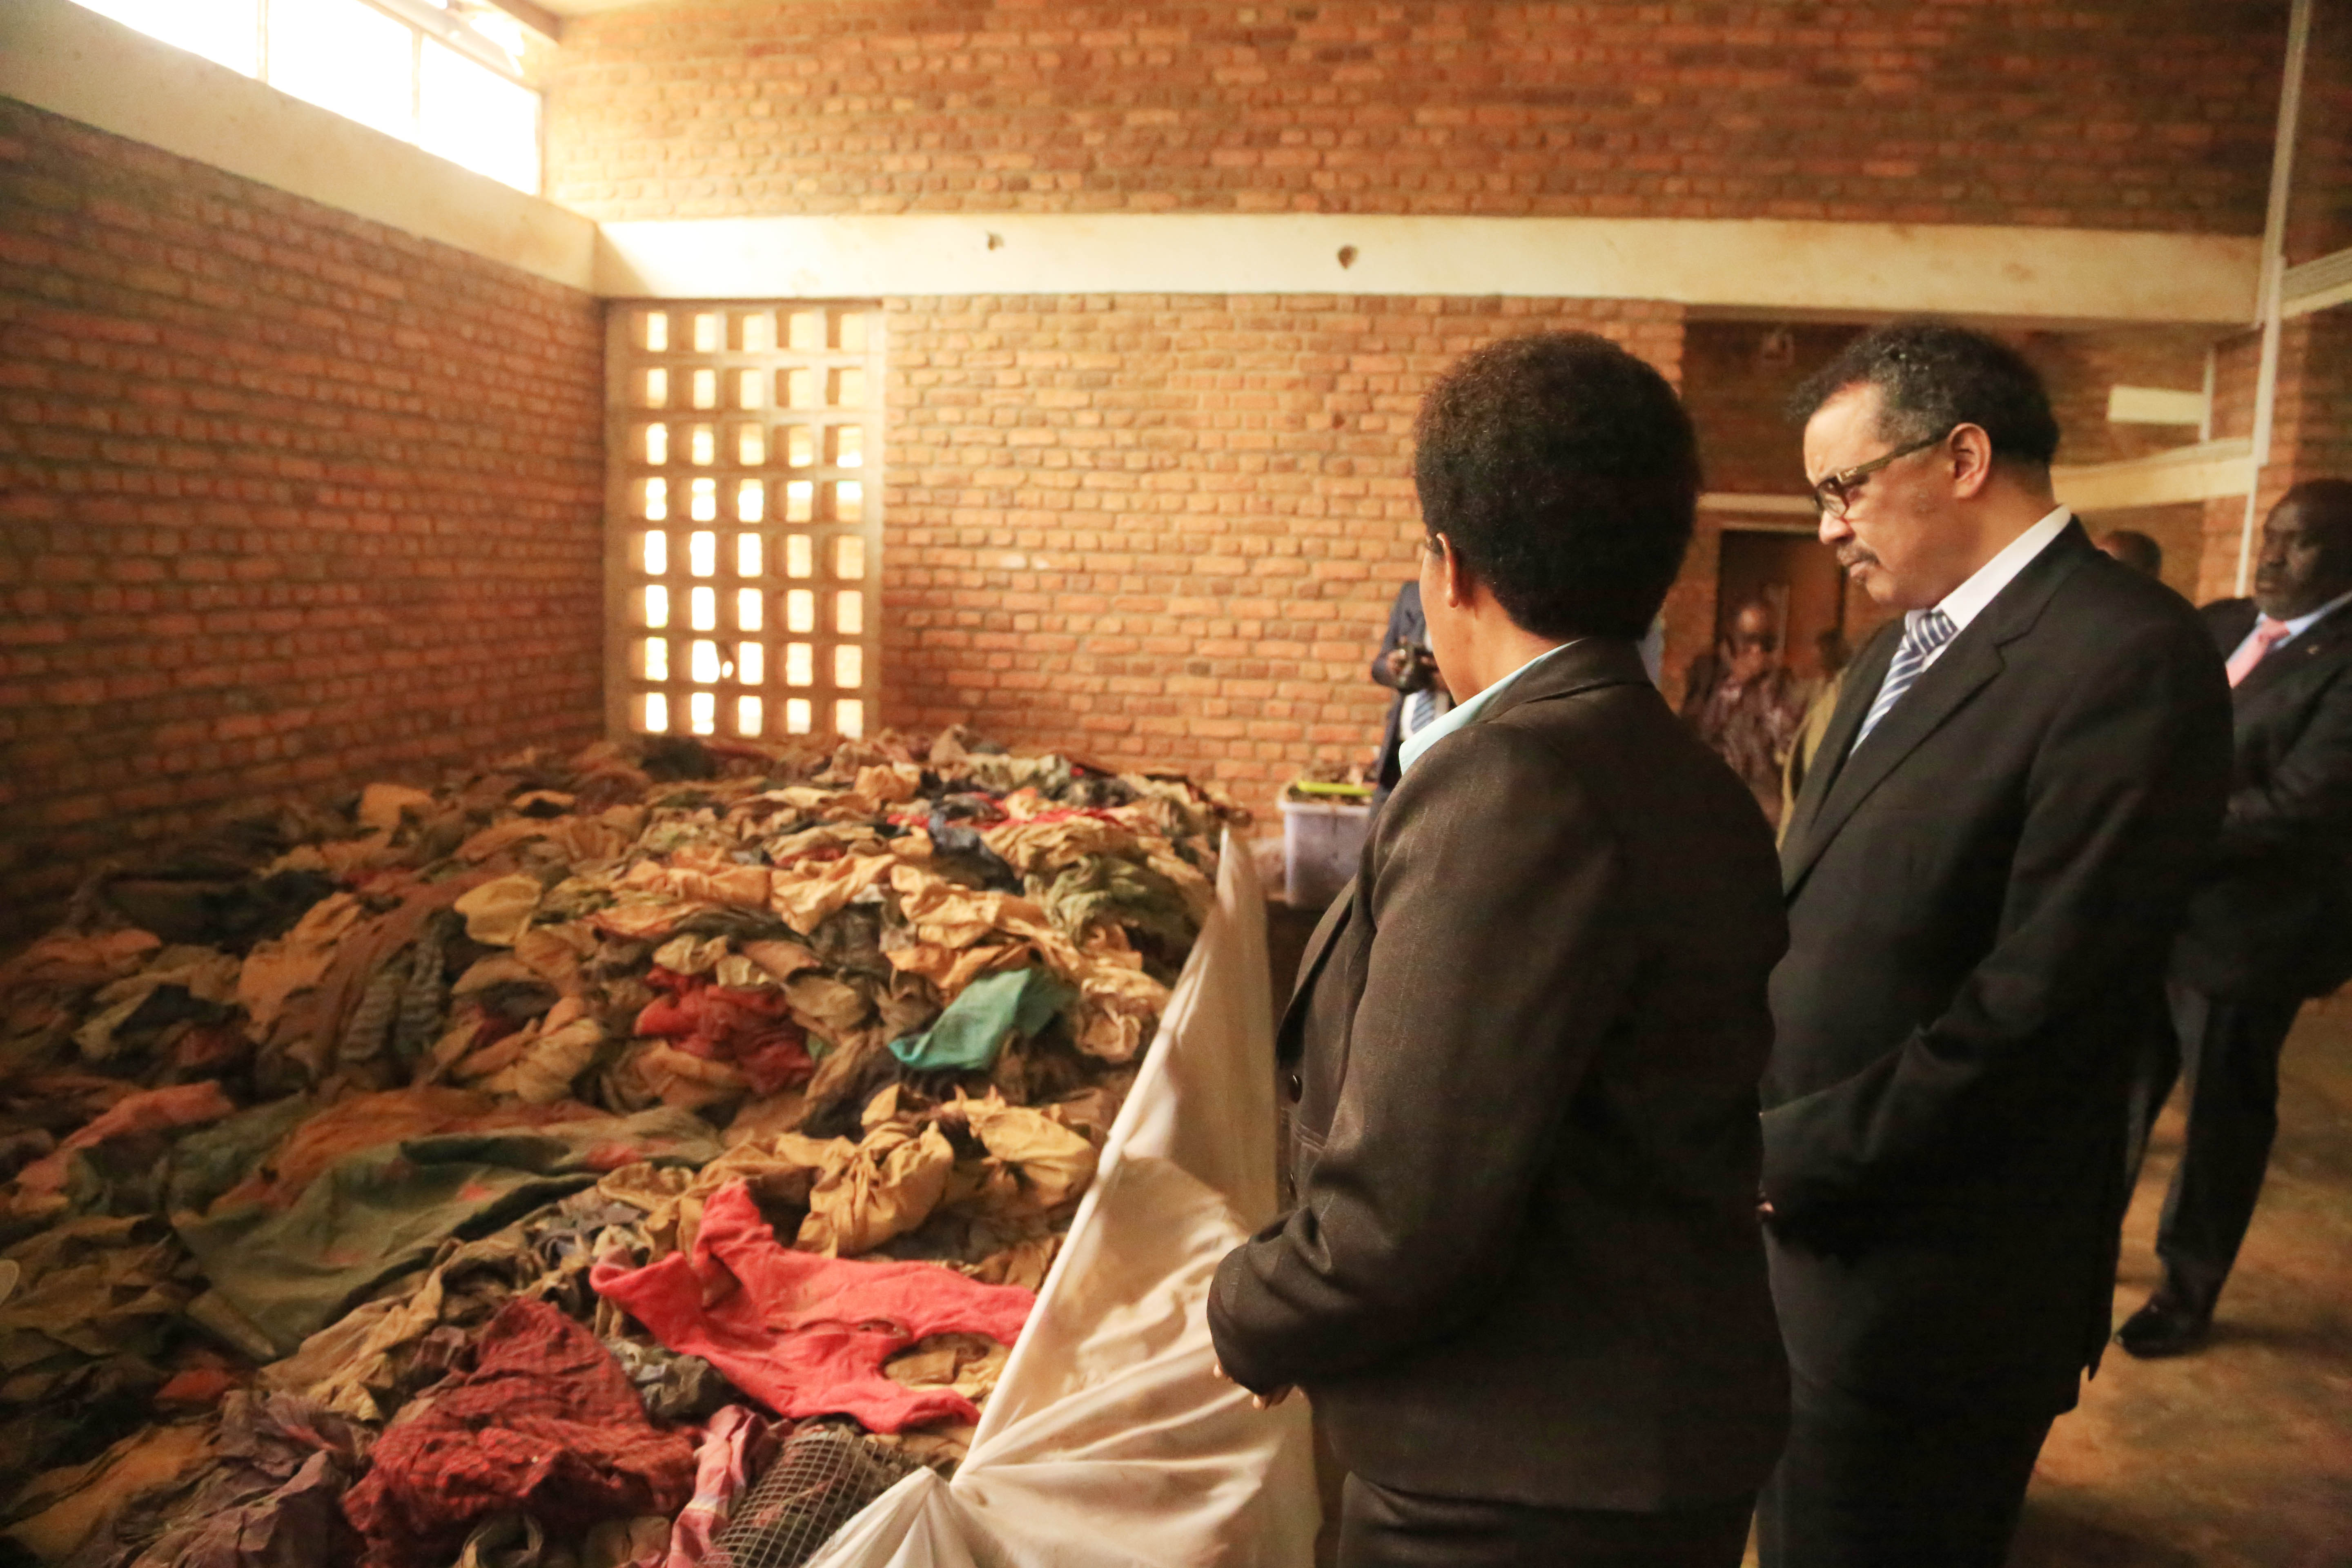 Dr Tedros Adhanom Ghebreyesus, the Director-General, World Health Organization, during a visit to Nyamata Genocide Memorial, previously a Catholic Church, on January 11, 2018. Thousands of people were killed there during the Genocide against the Tutsi. 